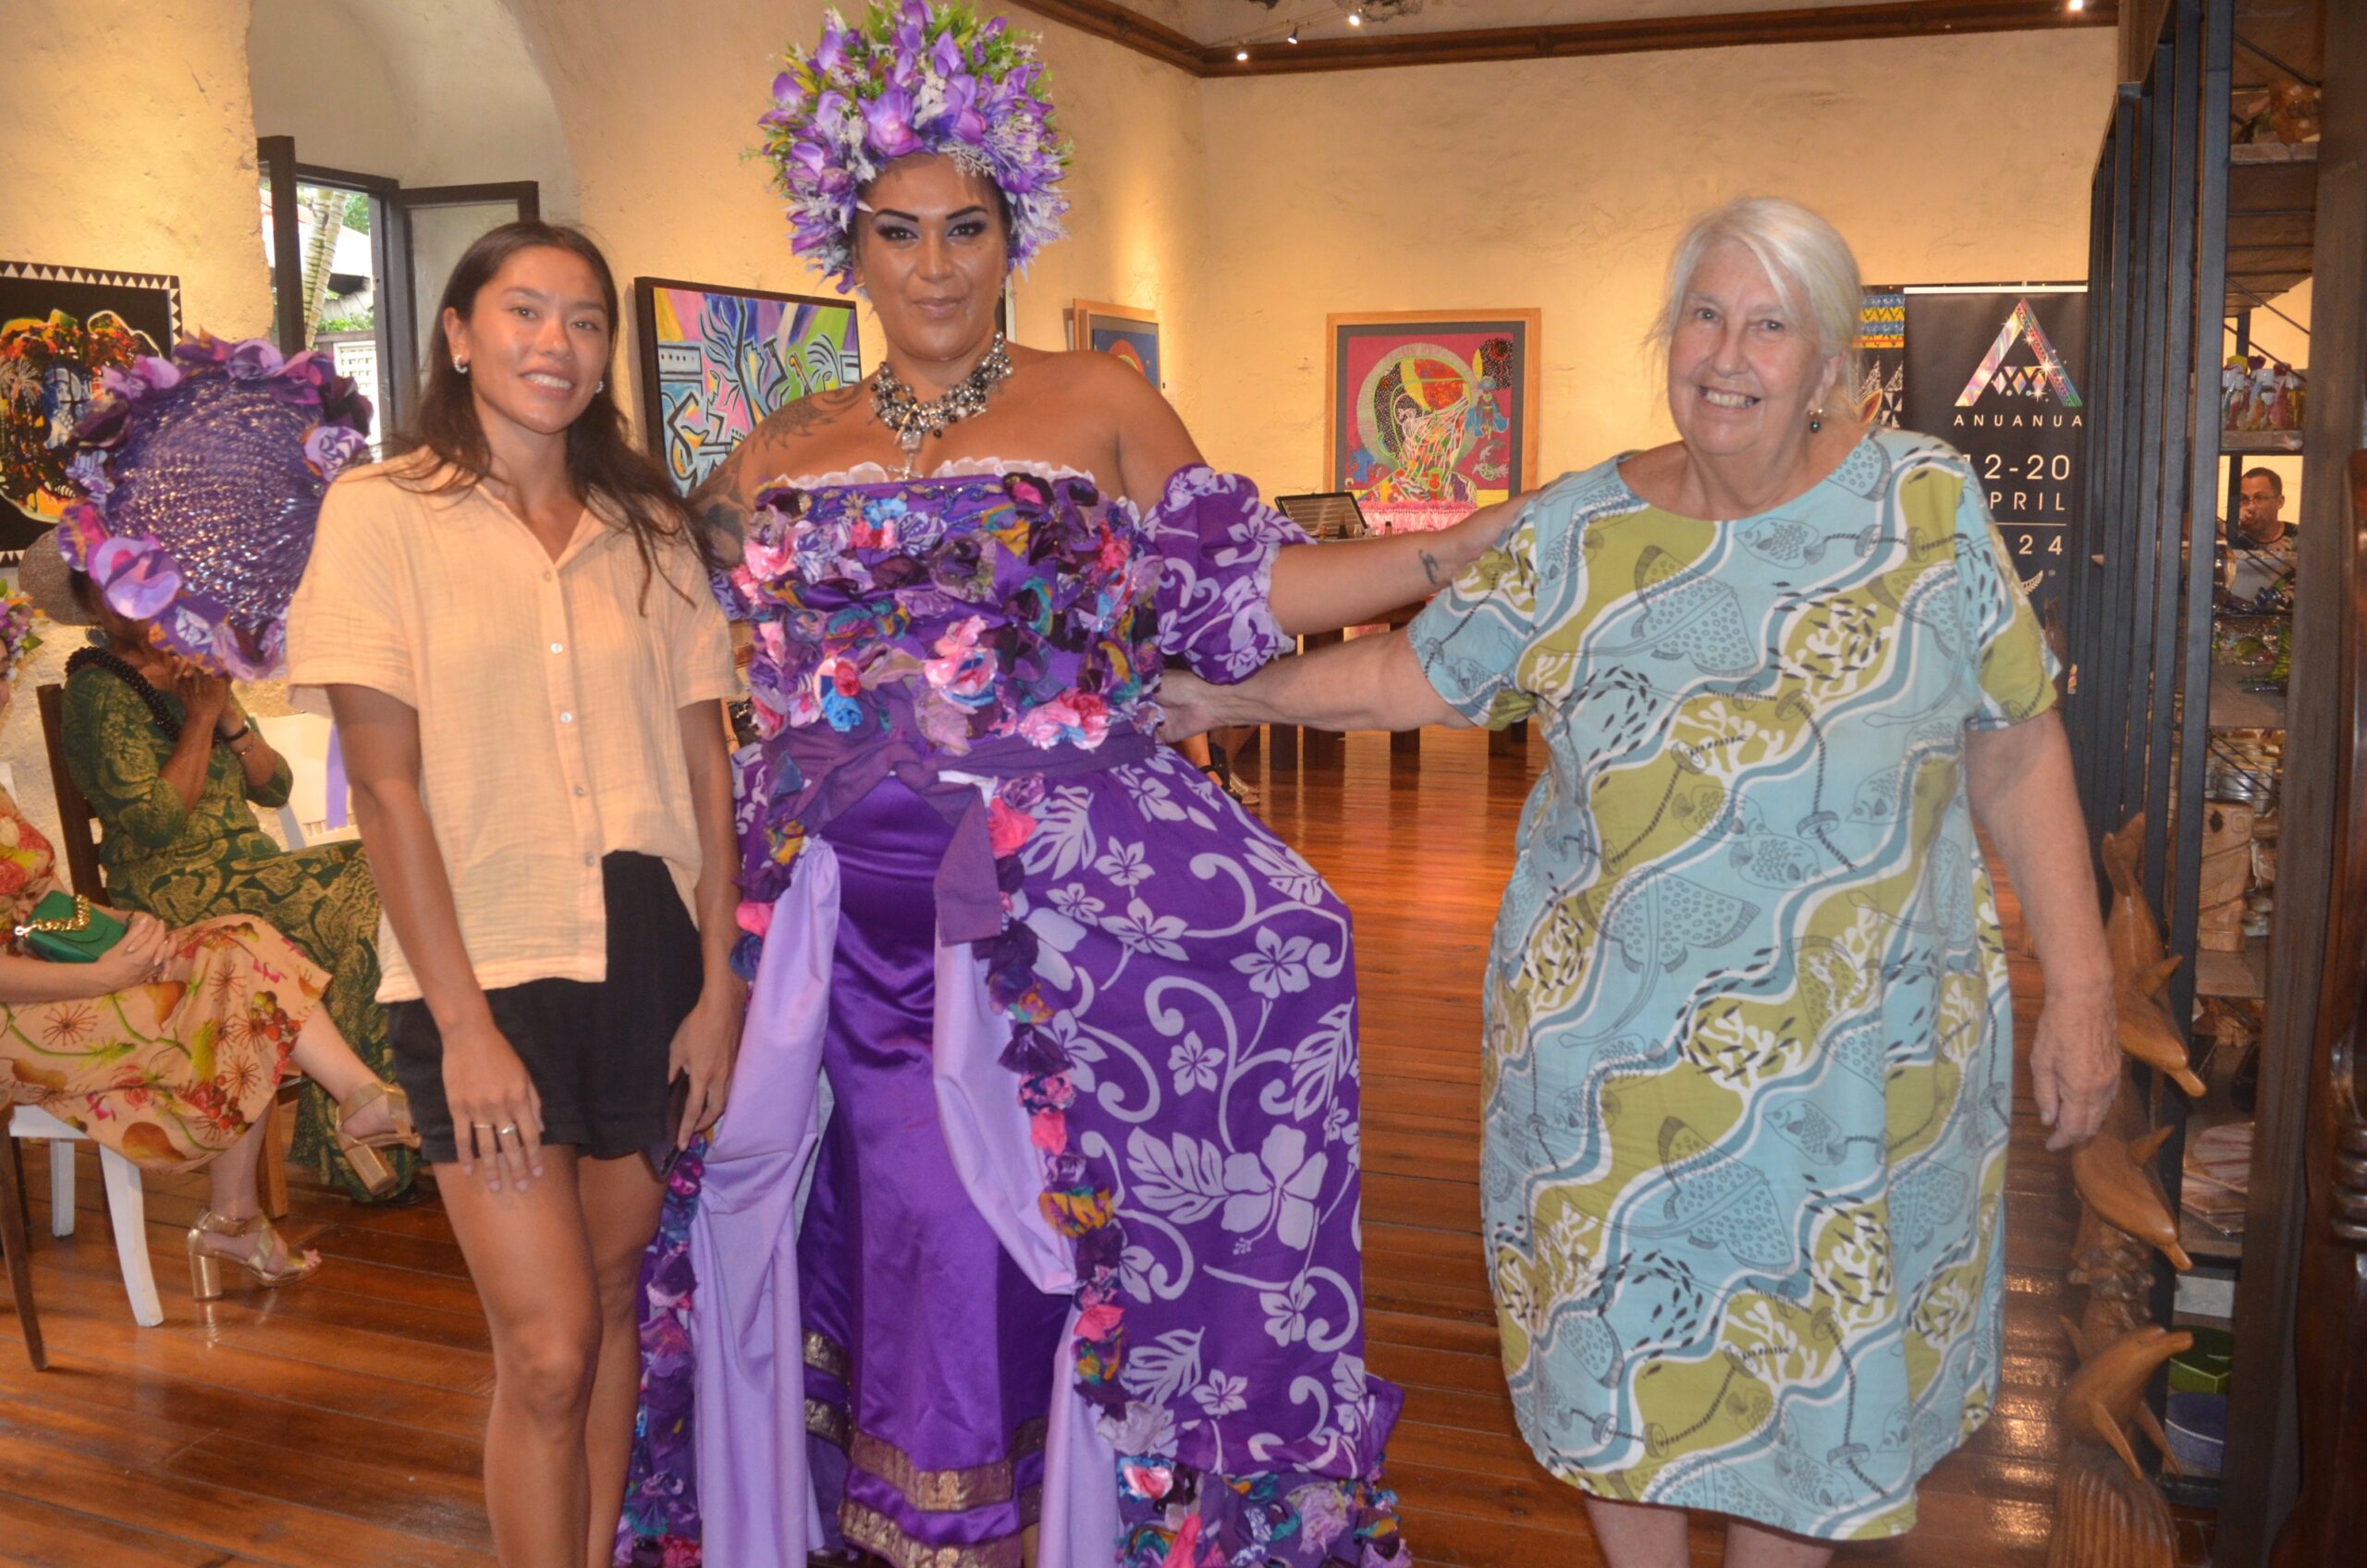 Anuanua Festival kicks off with dazzling wearable art competition